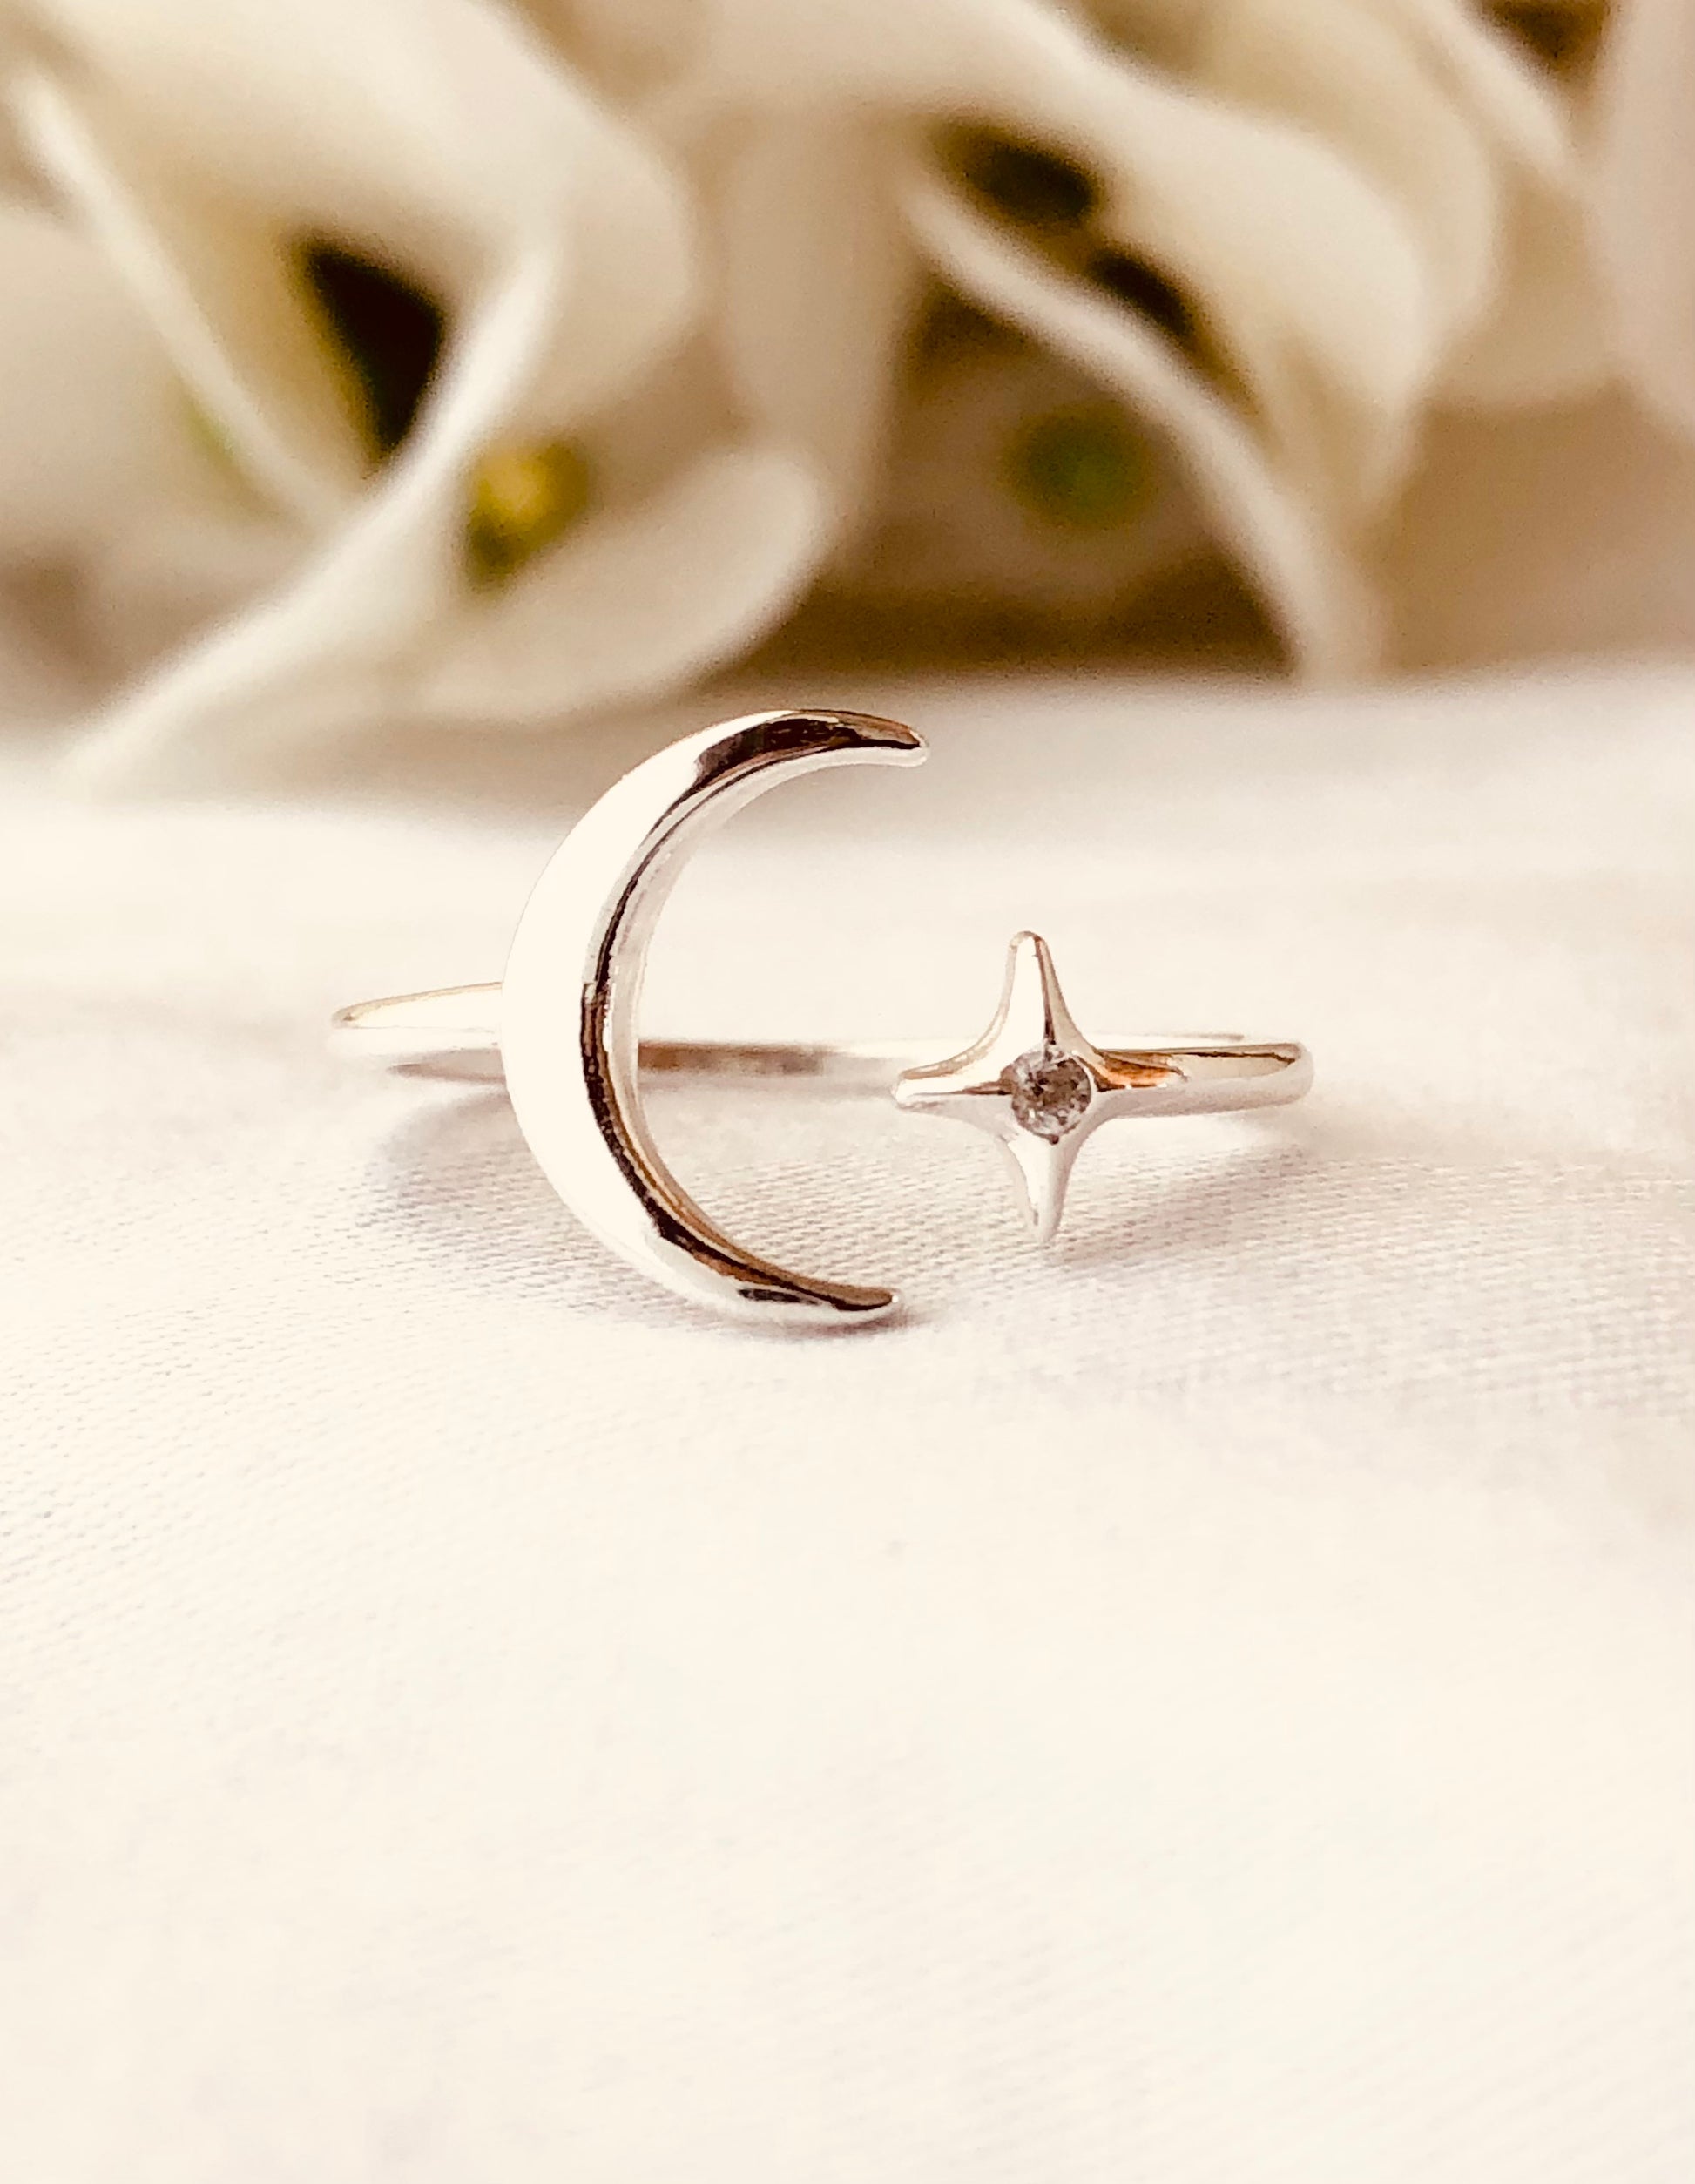 Moon And Star Ring, Celestial Ring, Moon and North Star, Sterling Silver Ring, Crescent Moon Ring, Holiday Gift, Adjustable Moon Ring